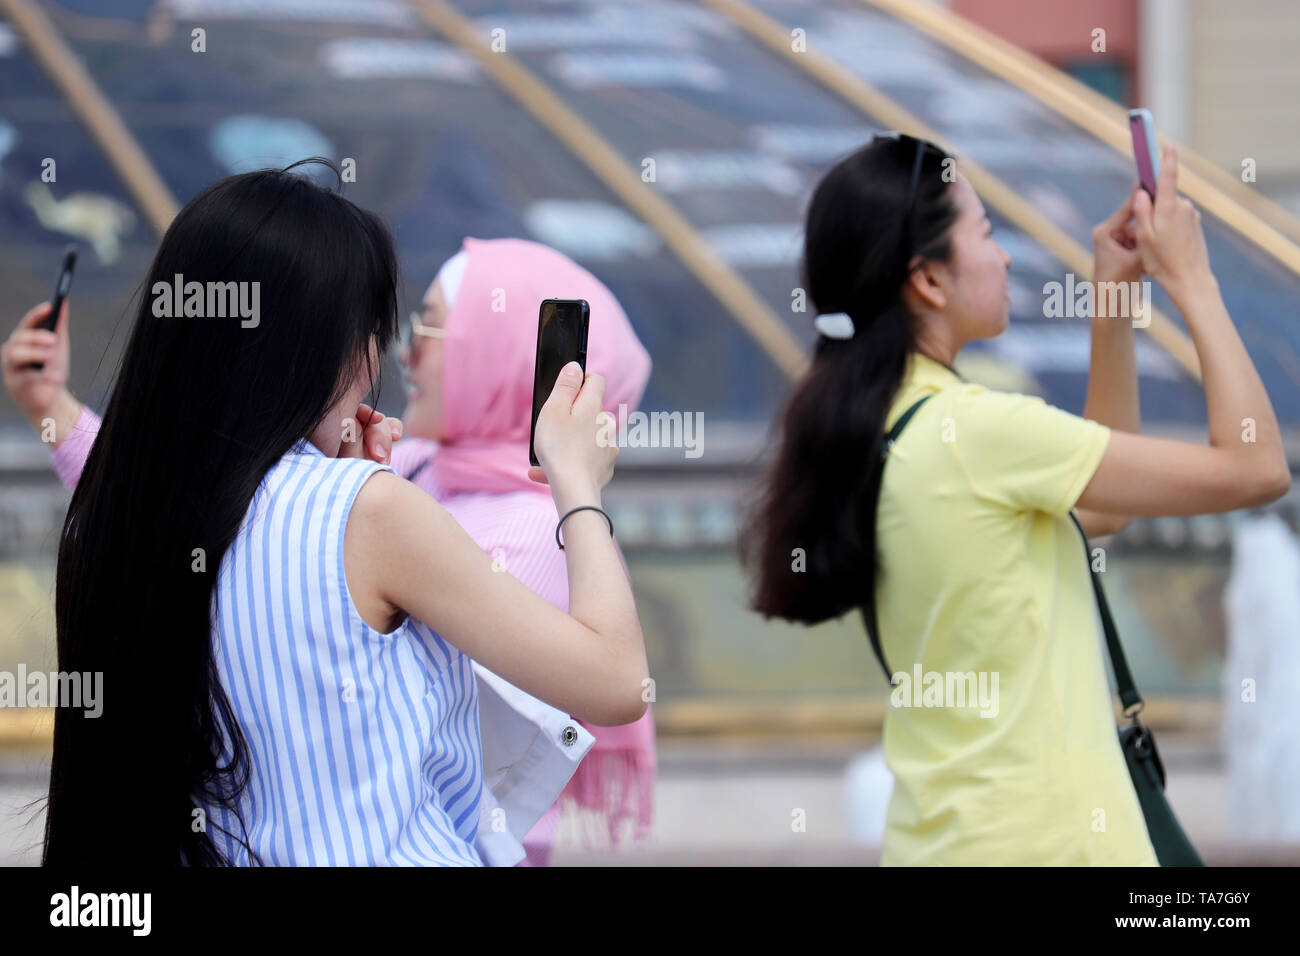 Happy asian and muslim girls make a selfie with smartphones on Manege square, selective focus. People using mobile phones, young women taking pictures Stock Photo